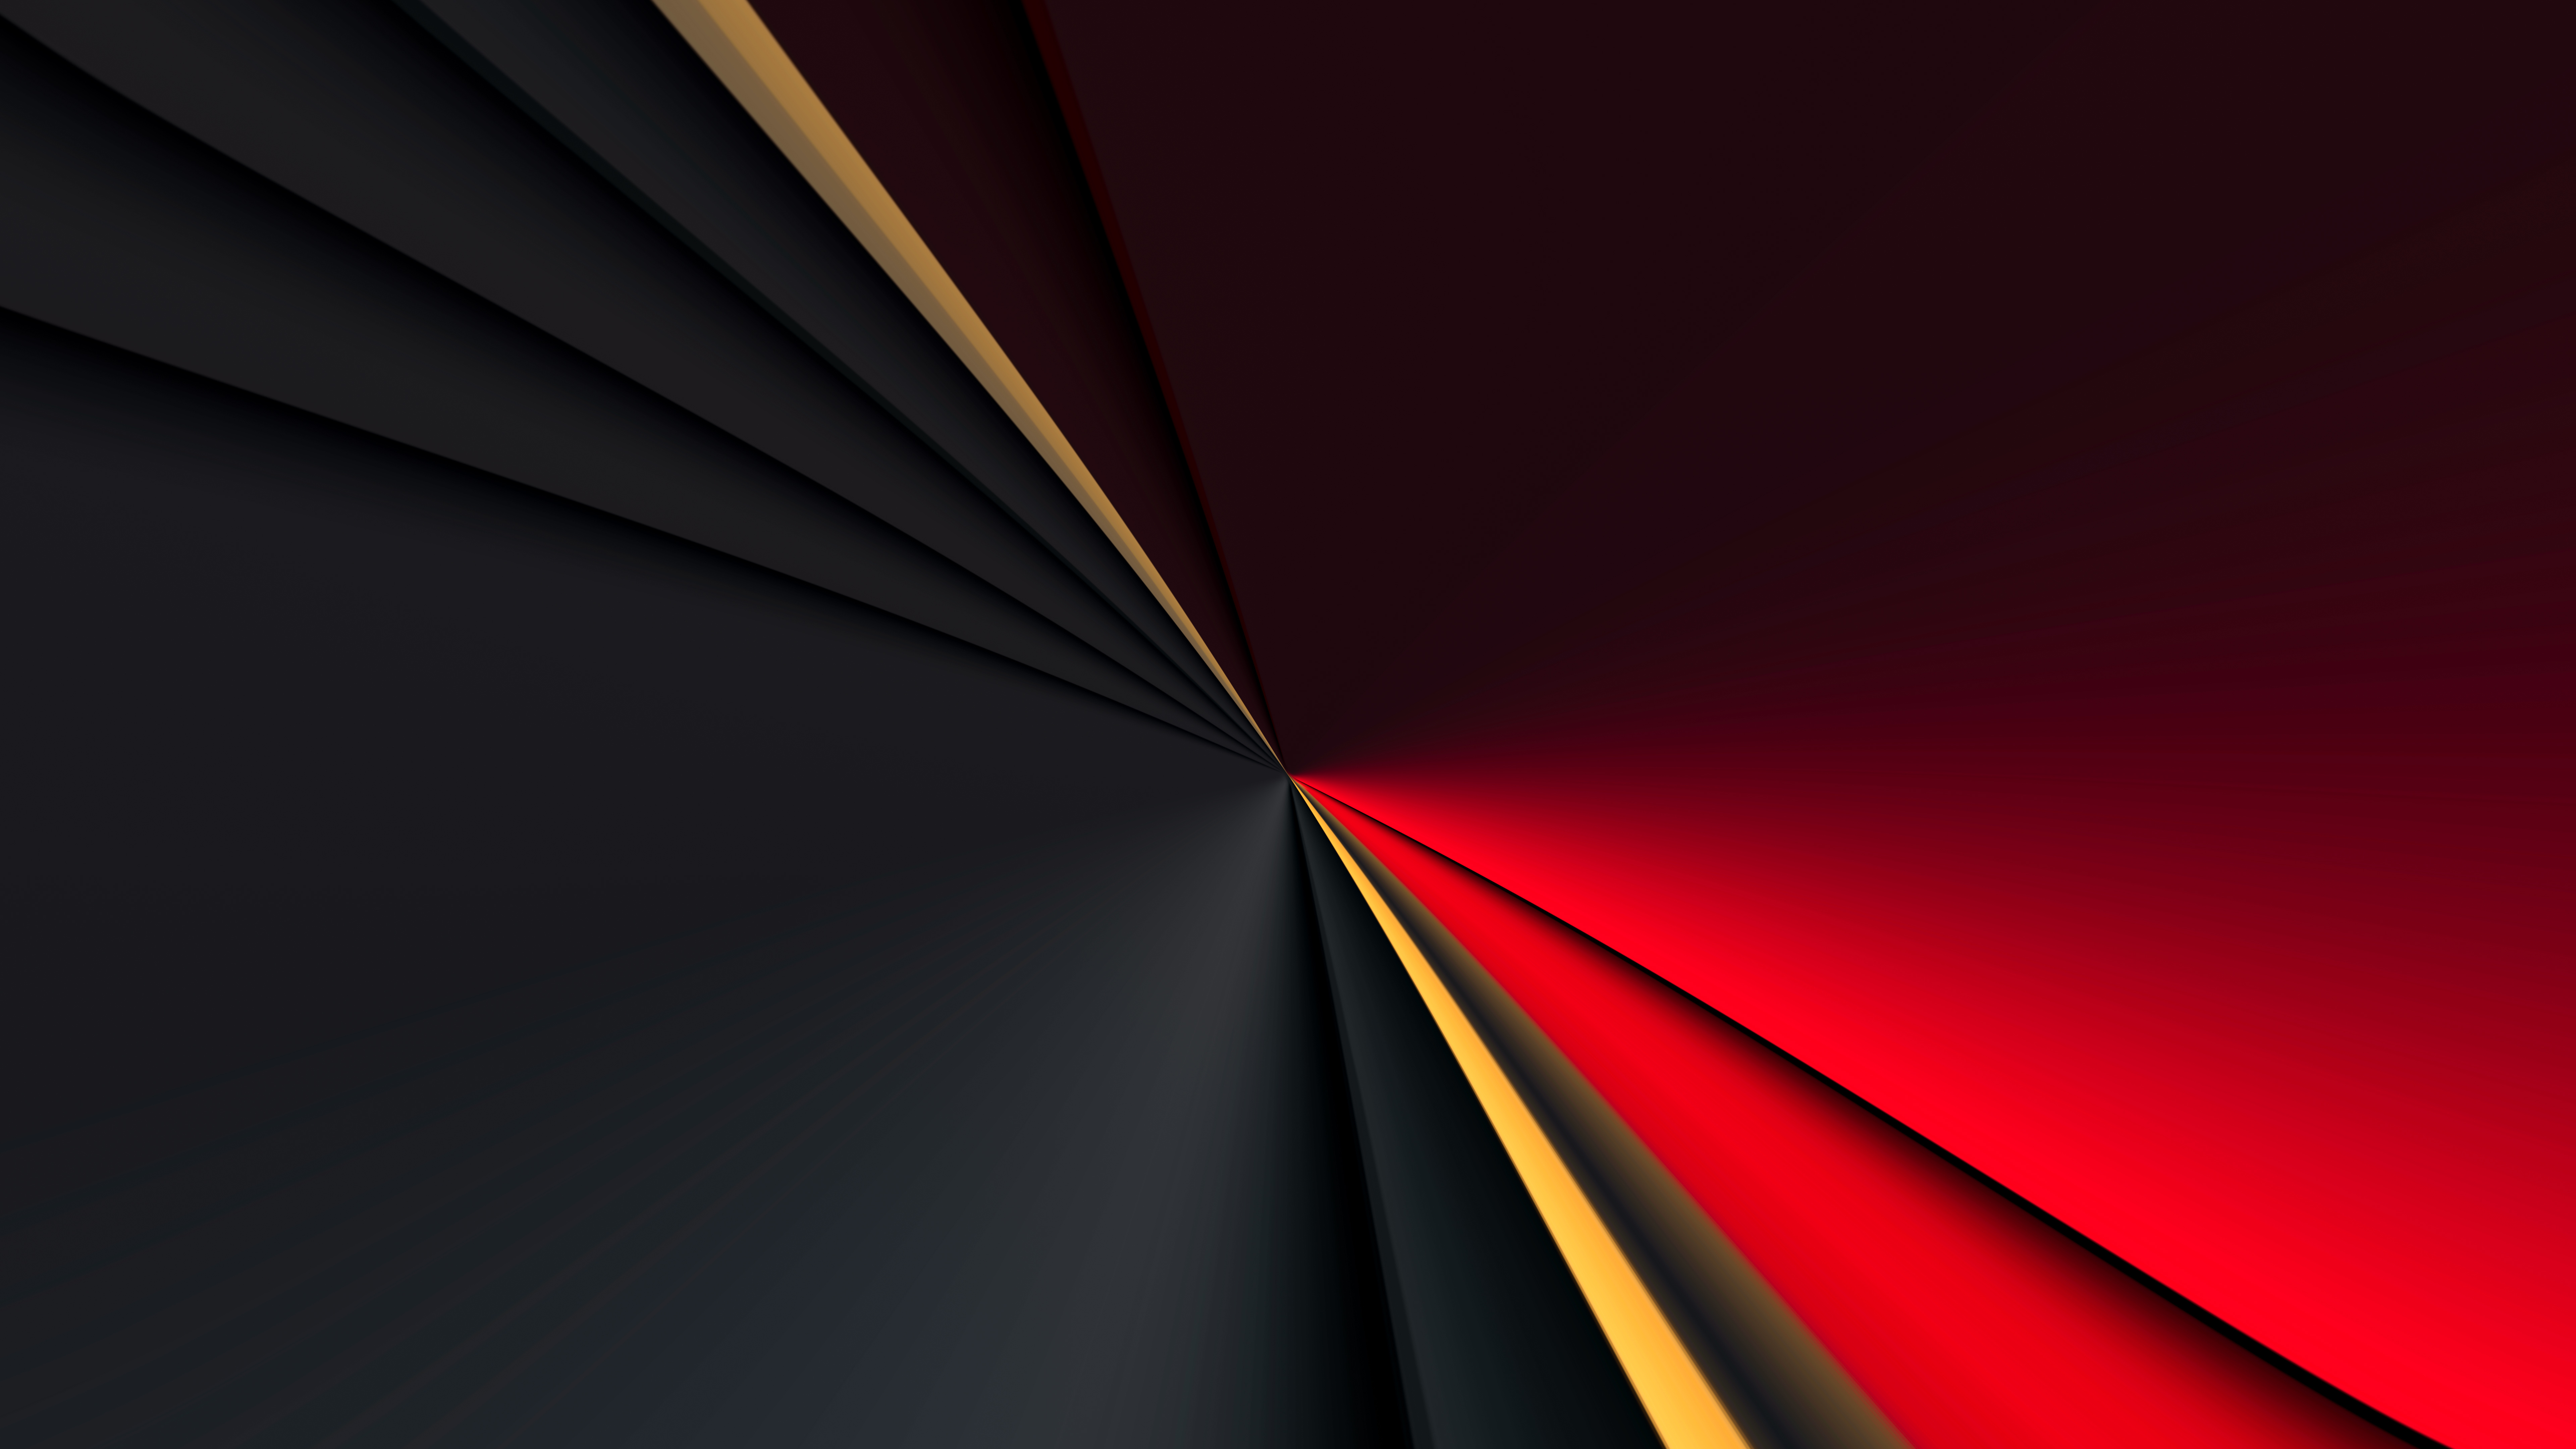 Download wallpaper 7680x4320 abstract, dark and multi-colored stripes,  pattern 8k wallpaper, 7680x4320 8k background, 27064